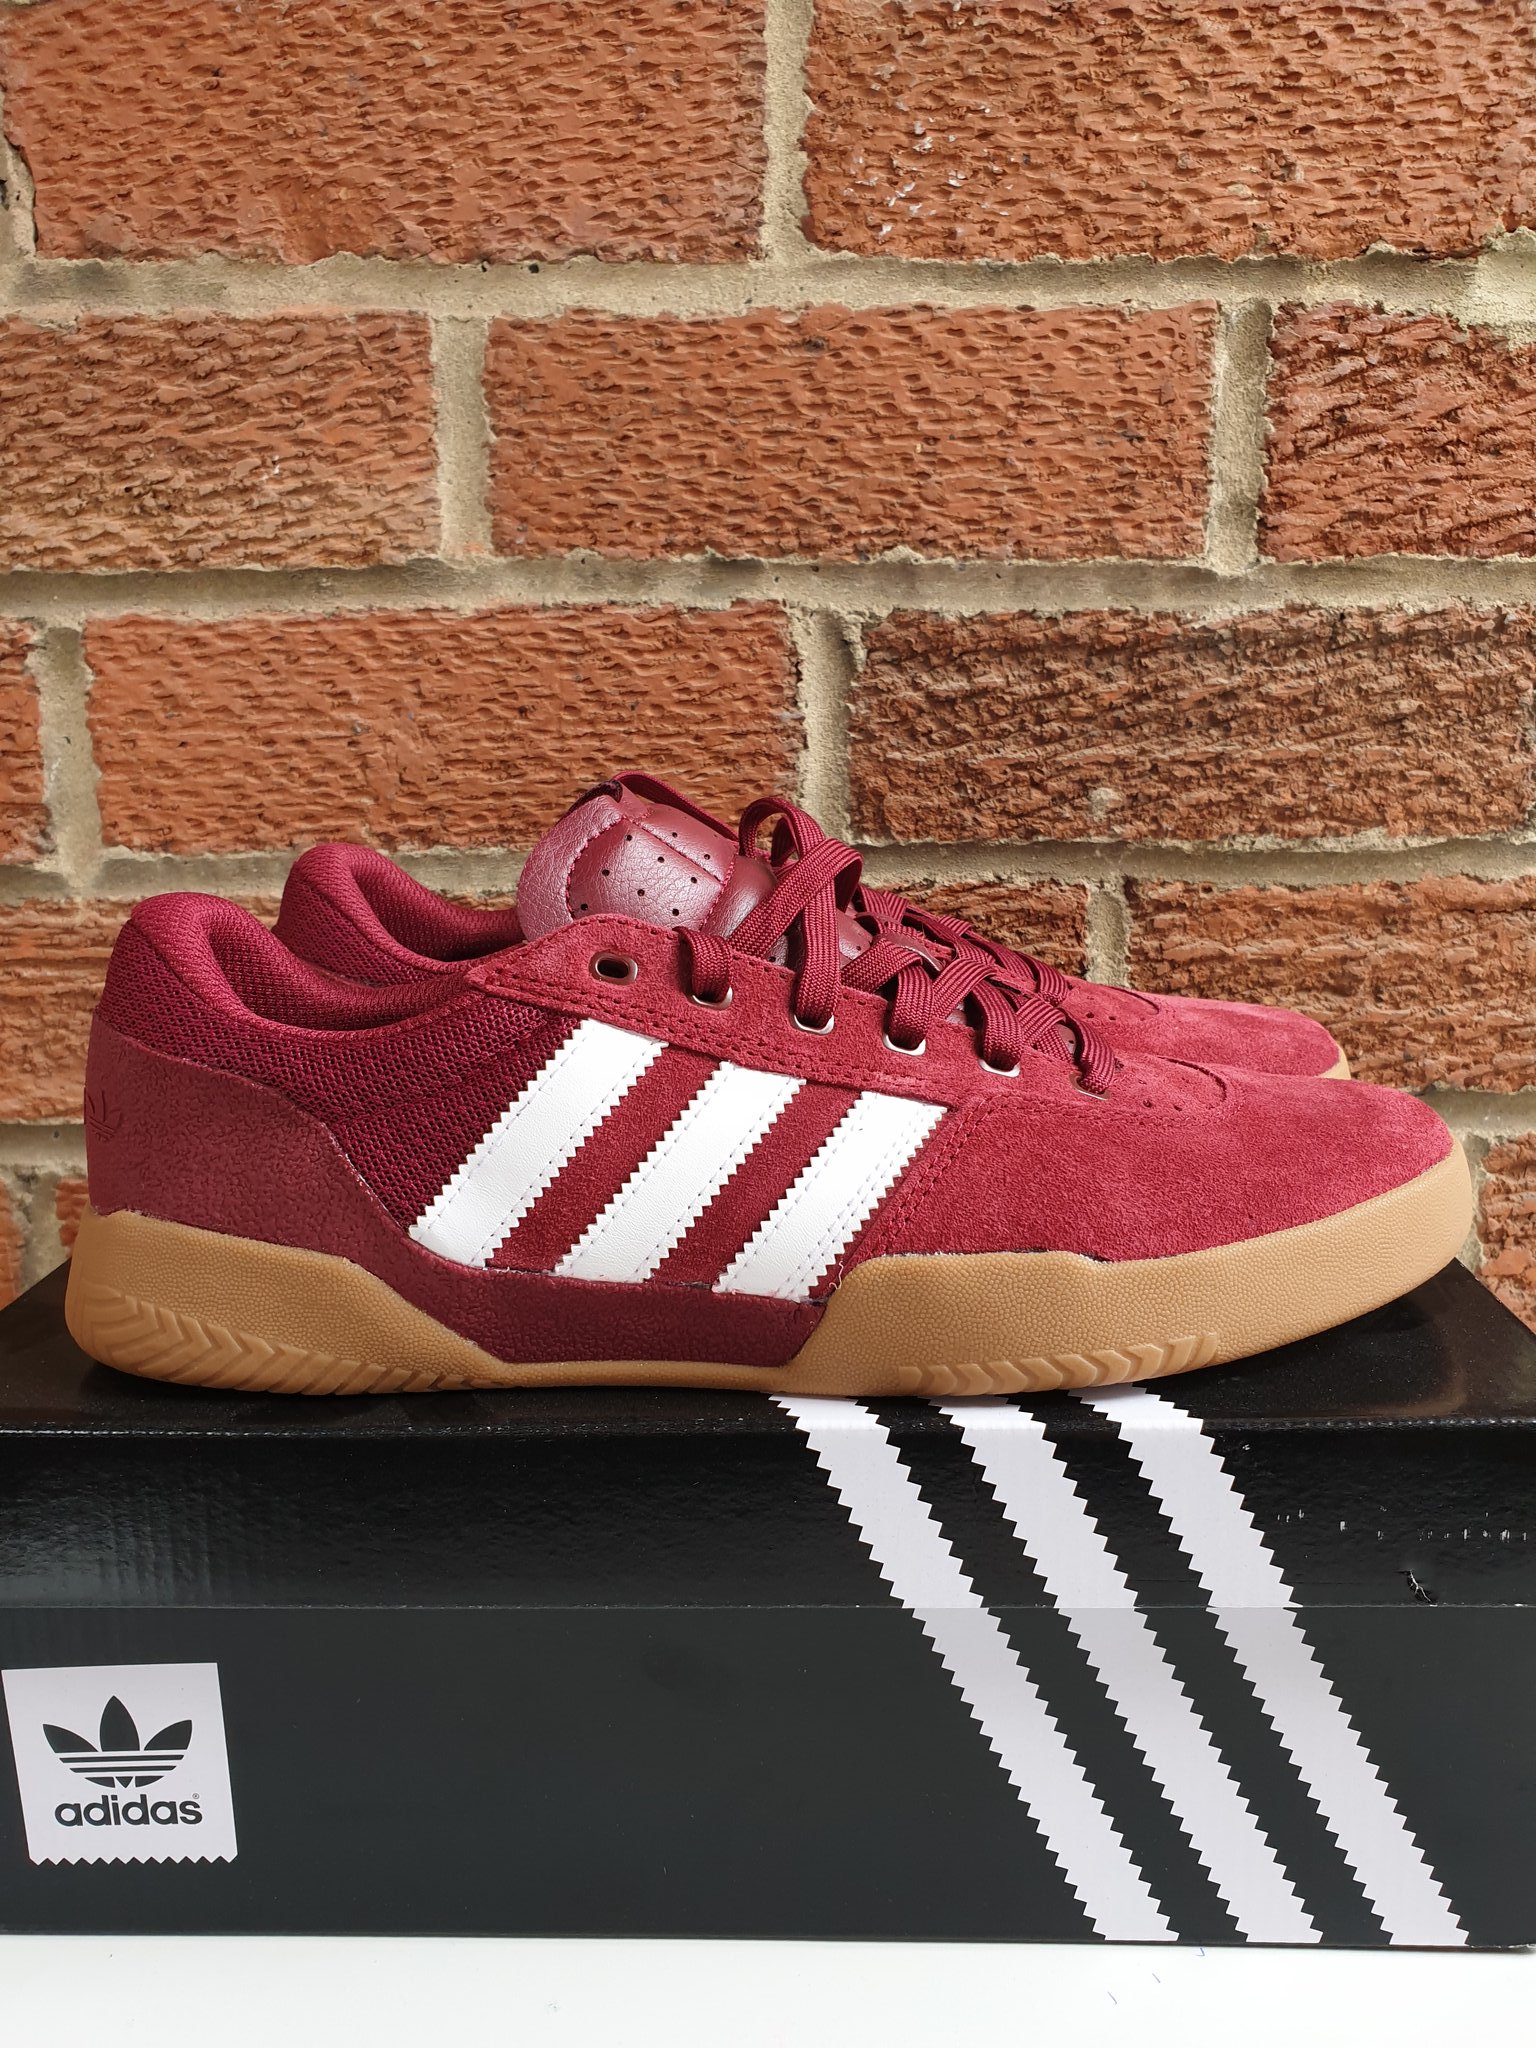 KGS Trainers on "Adidas city cup Size 8 UK £45 delivered. Add 4% for PayPal G&amp;S #adidas #citycup #adidascitycup #size8 #threestripe #adifamily #trainers #menstrainers #mensfashion #casual #awaydays https://t.co/88pE0OL9GY" / Twitter